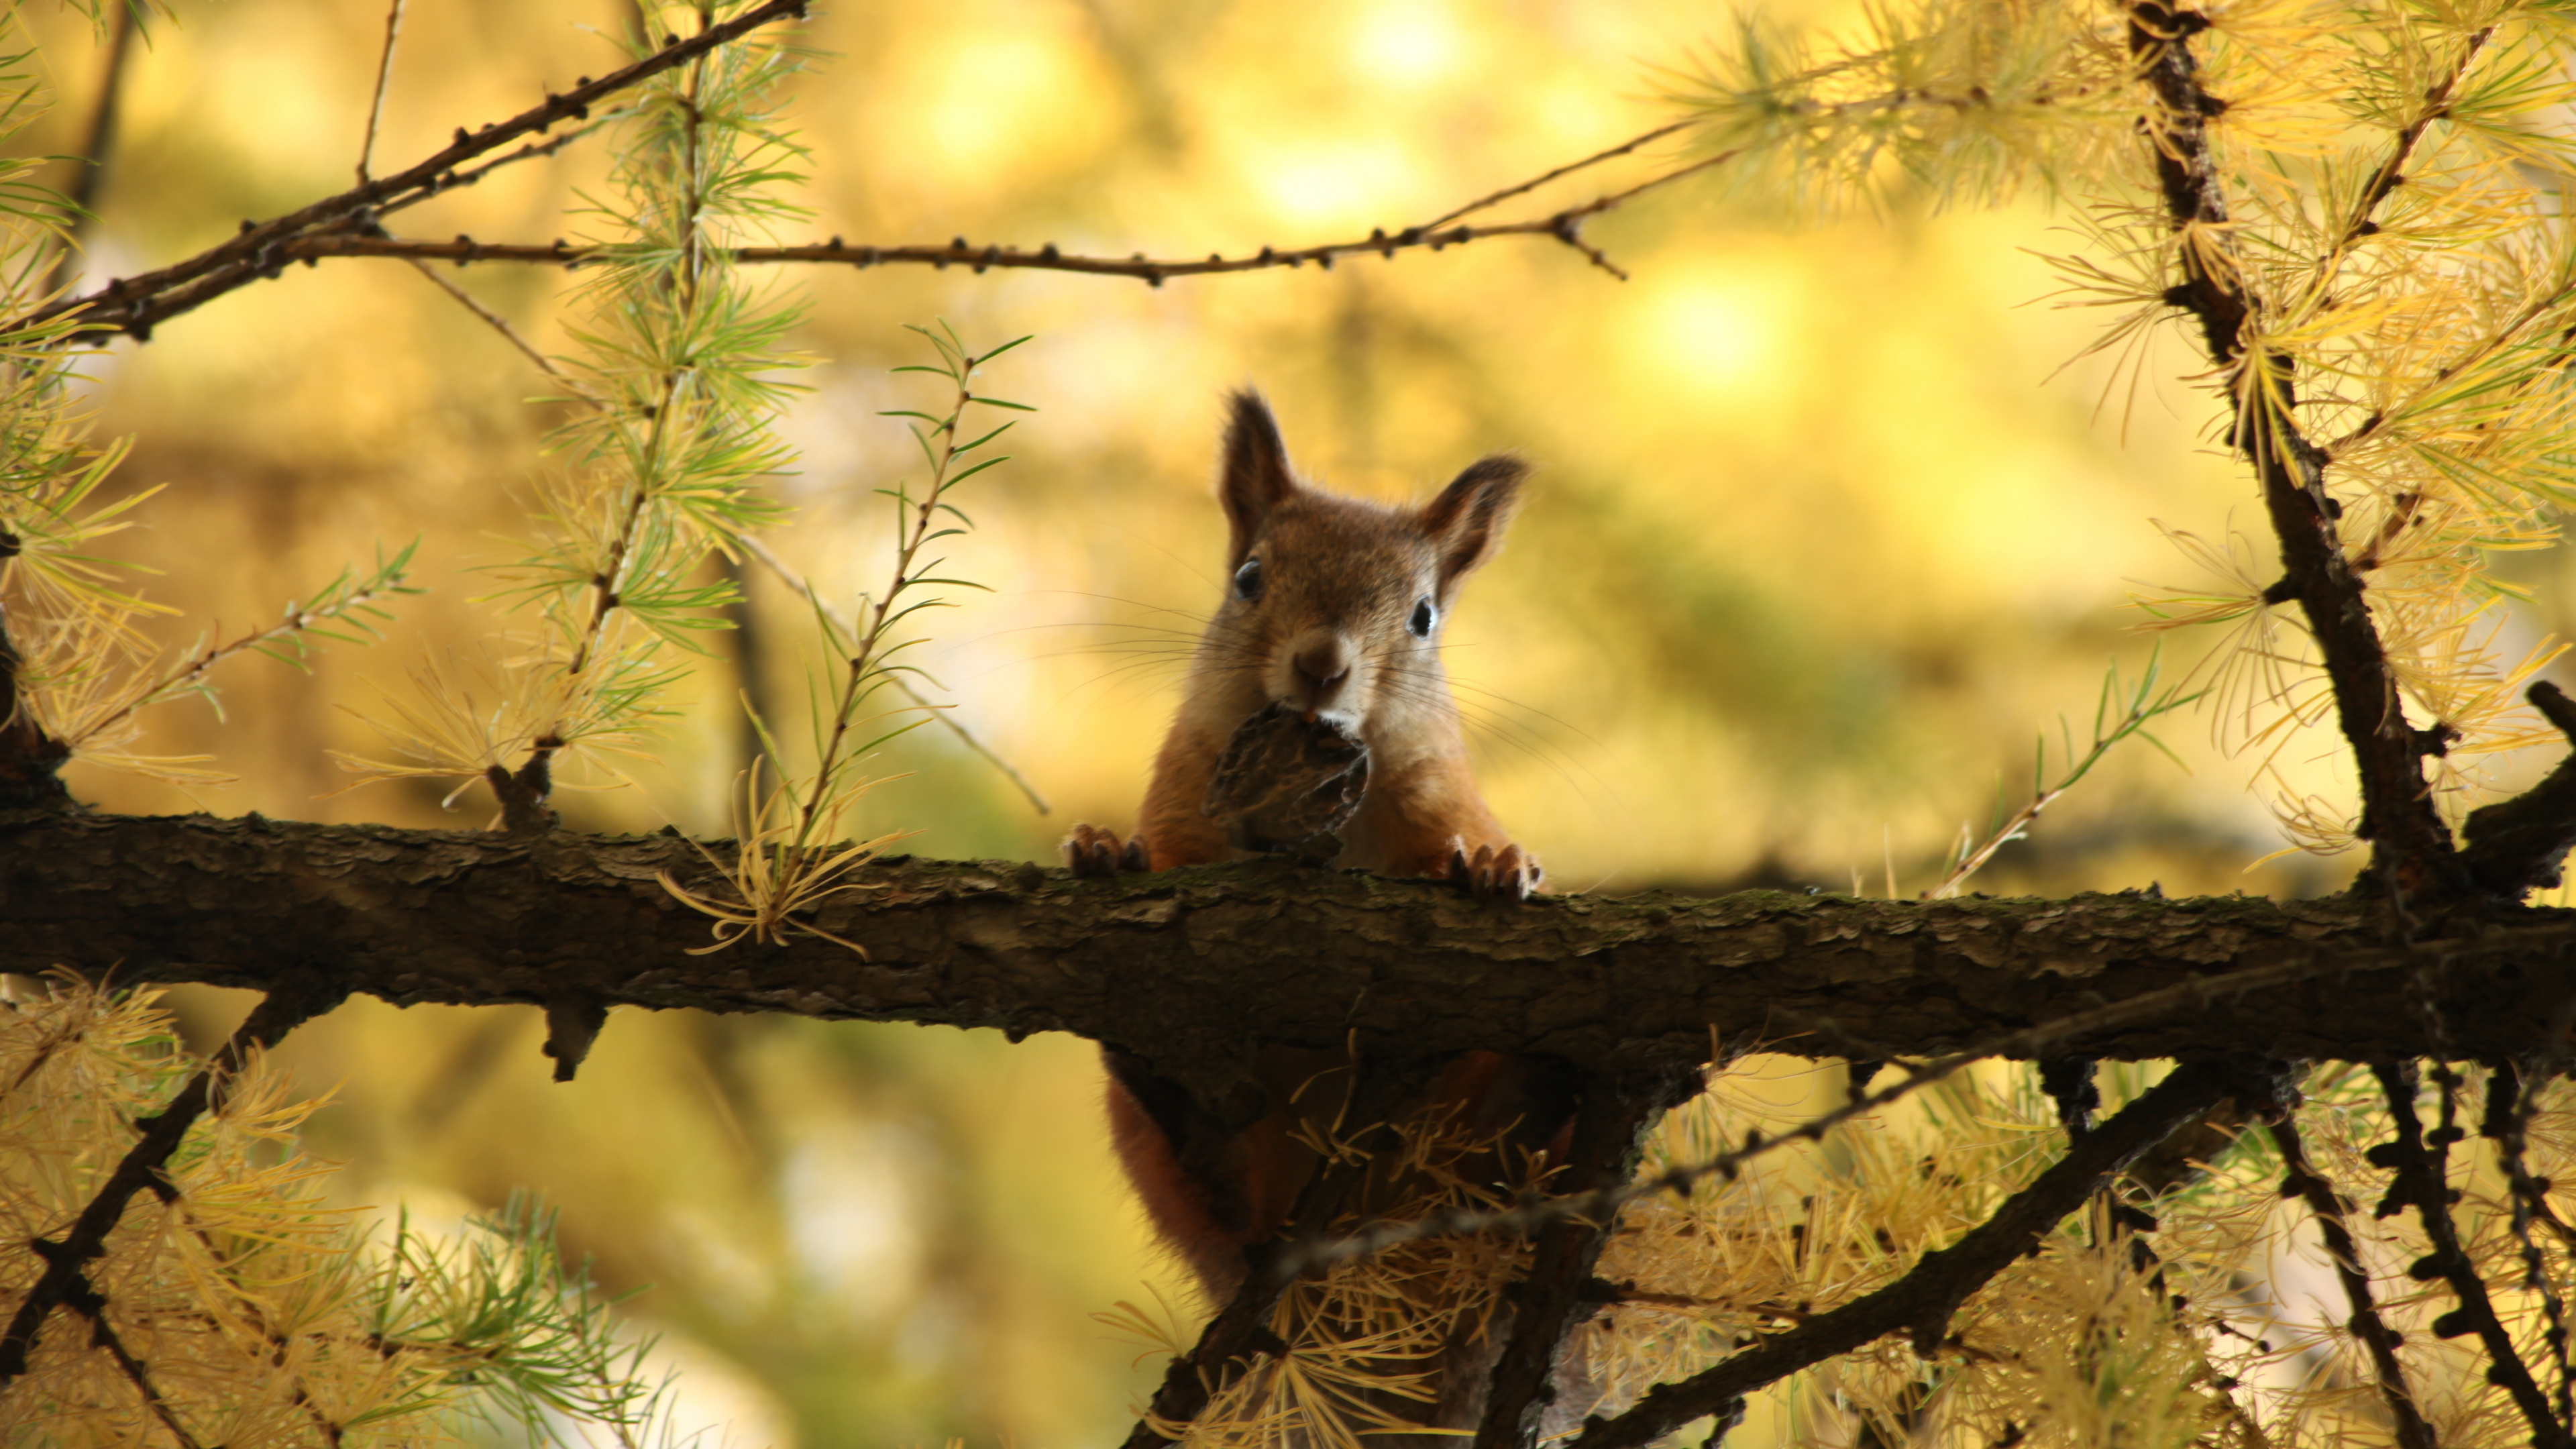 Brown Fox on Brown Tree Branch During Daytime. Wallpaper in 3840x2160 Resolution